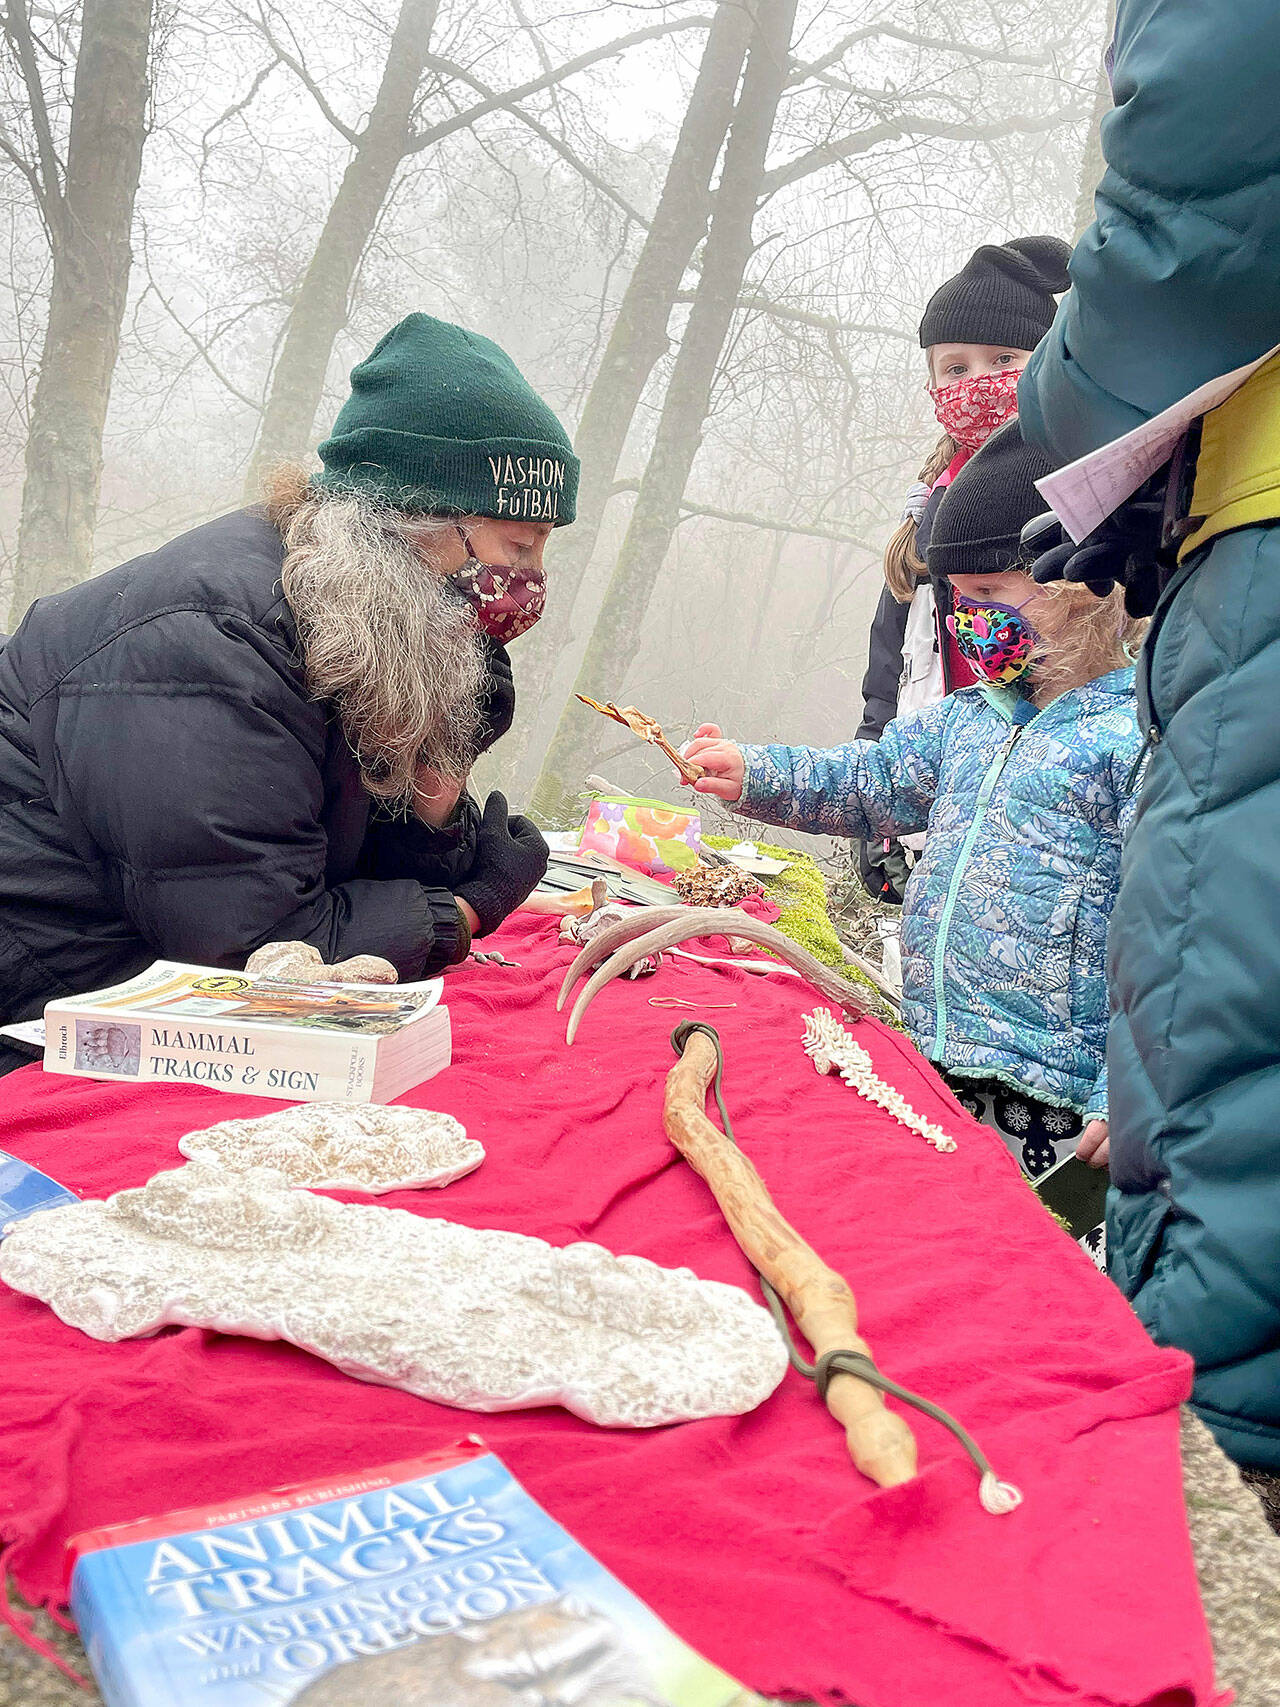 (Photo Courtesy Vashon Wilderness Program) “Heartwood,” an online auction running March 11 to 21, will raise money for the Vashon Wilderness Program, which immerses people of all ages in experiences with nature.